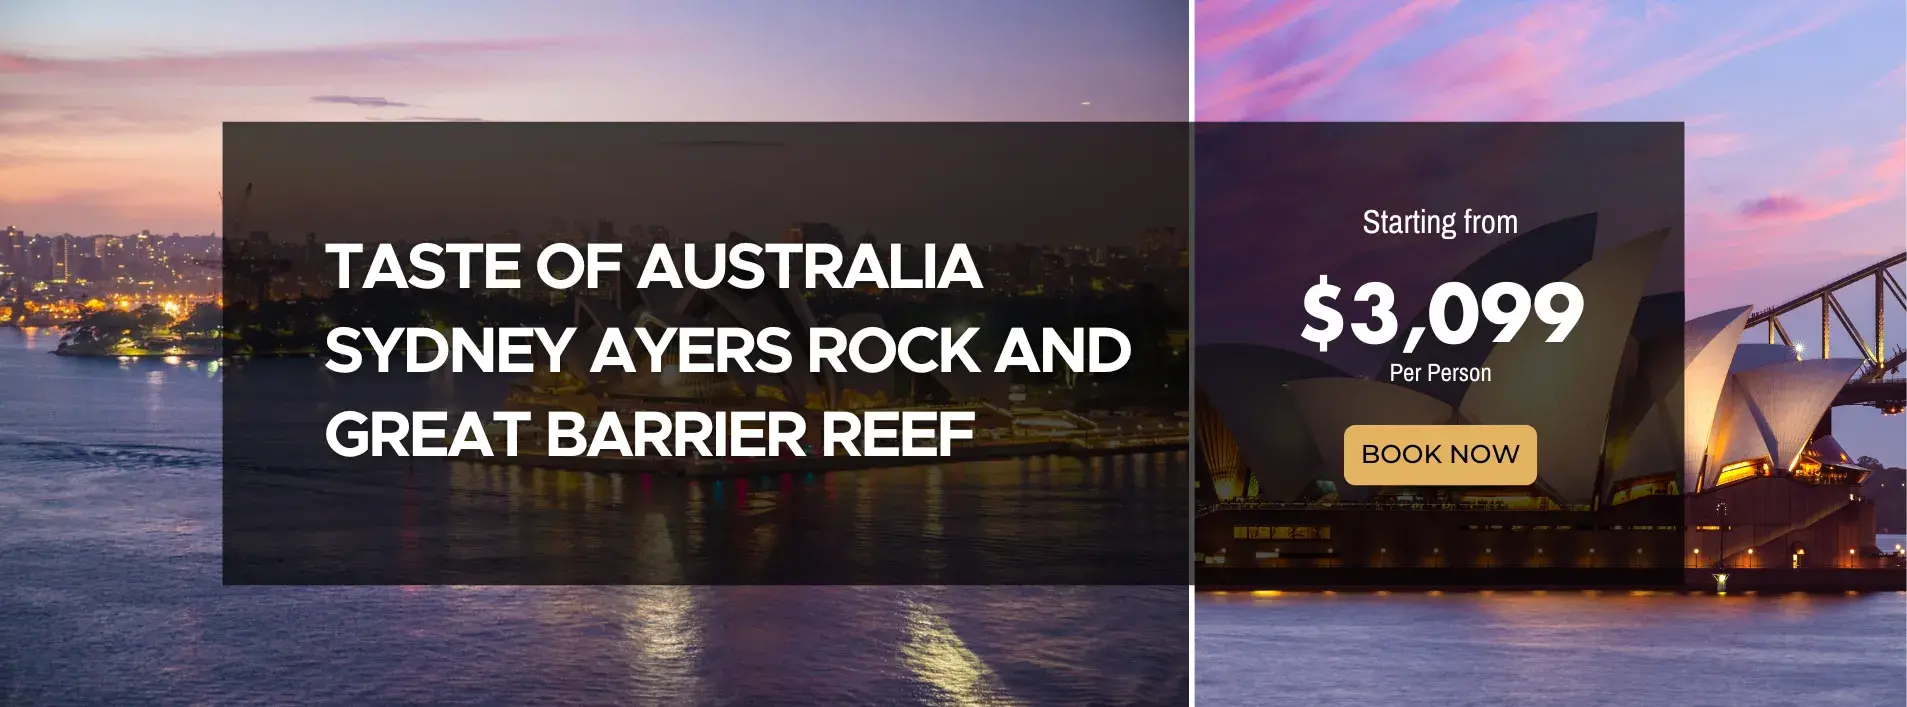 Taste of Australia Sydney, Ayers Rock and Great Barrier Reef W/Air